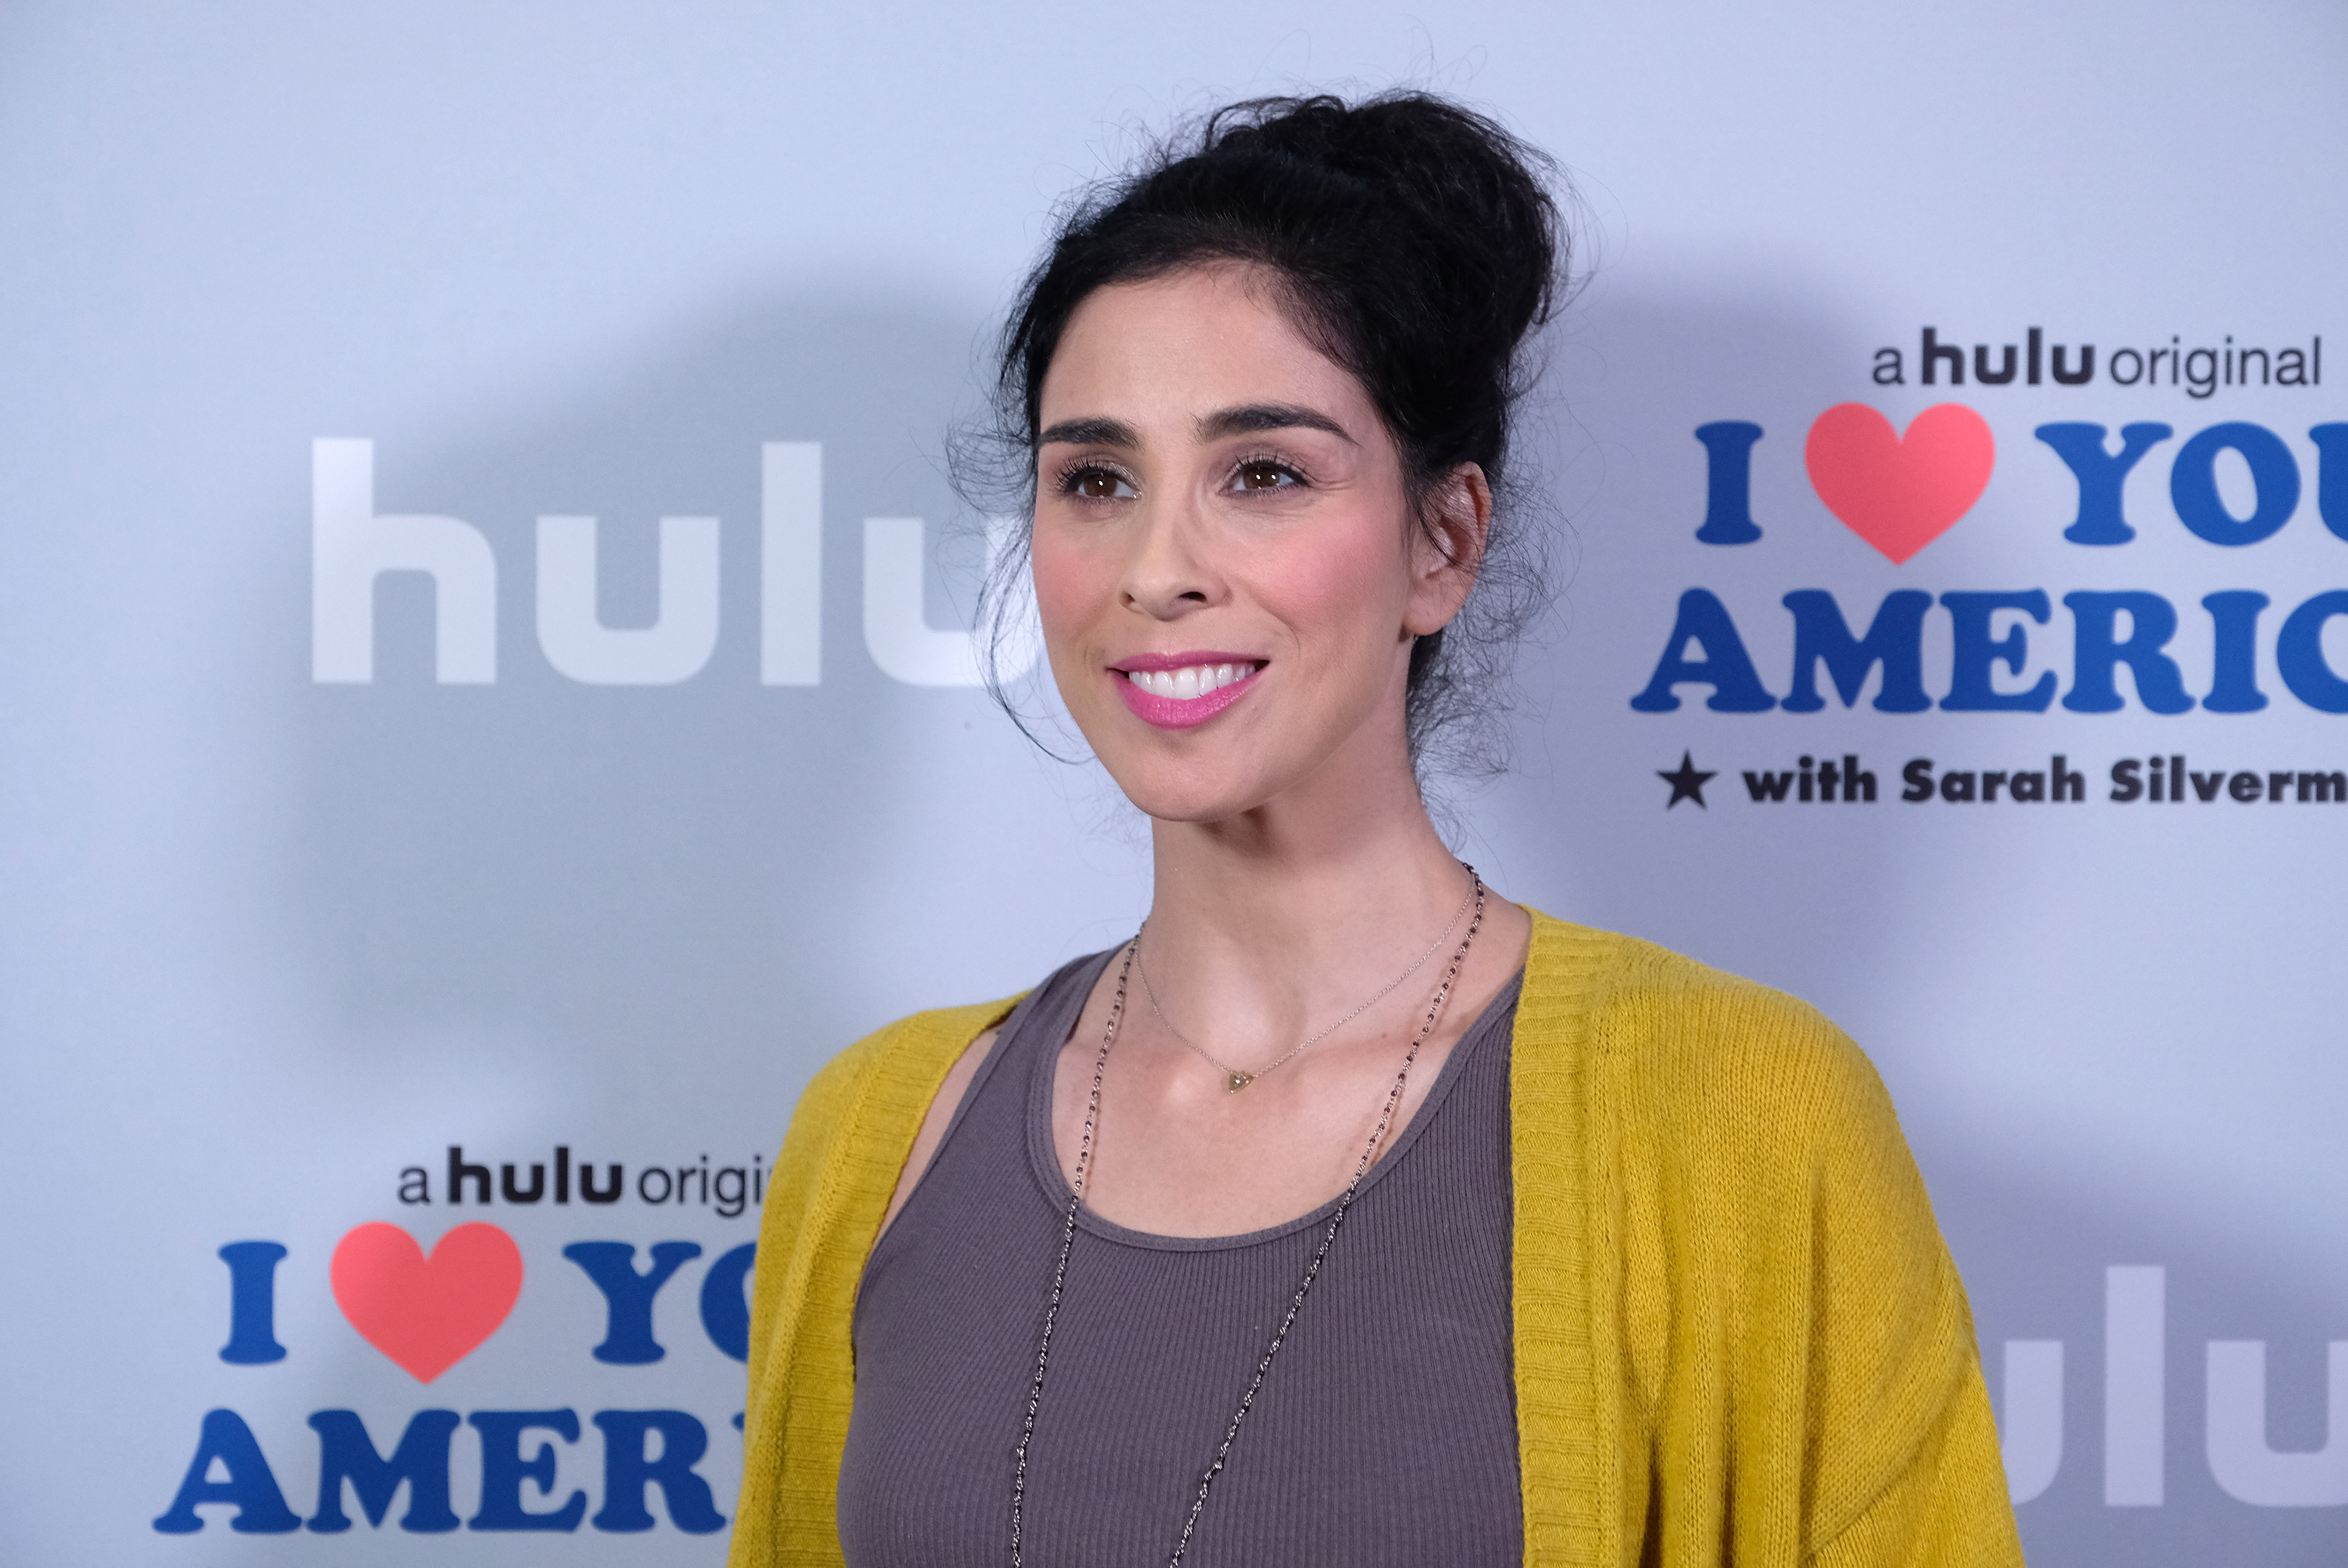 Actress/executive producer Sarah Silverman attends a photo op for Hulu's "I Love You America" with Sarah Silverman at Chateau Marmont on Oct. 11, 2017 in Los Angeles. (Alberto E. Rodriguez—Getty Images)